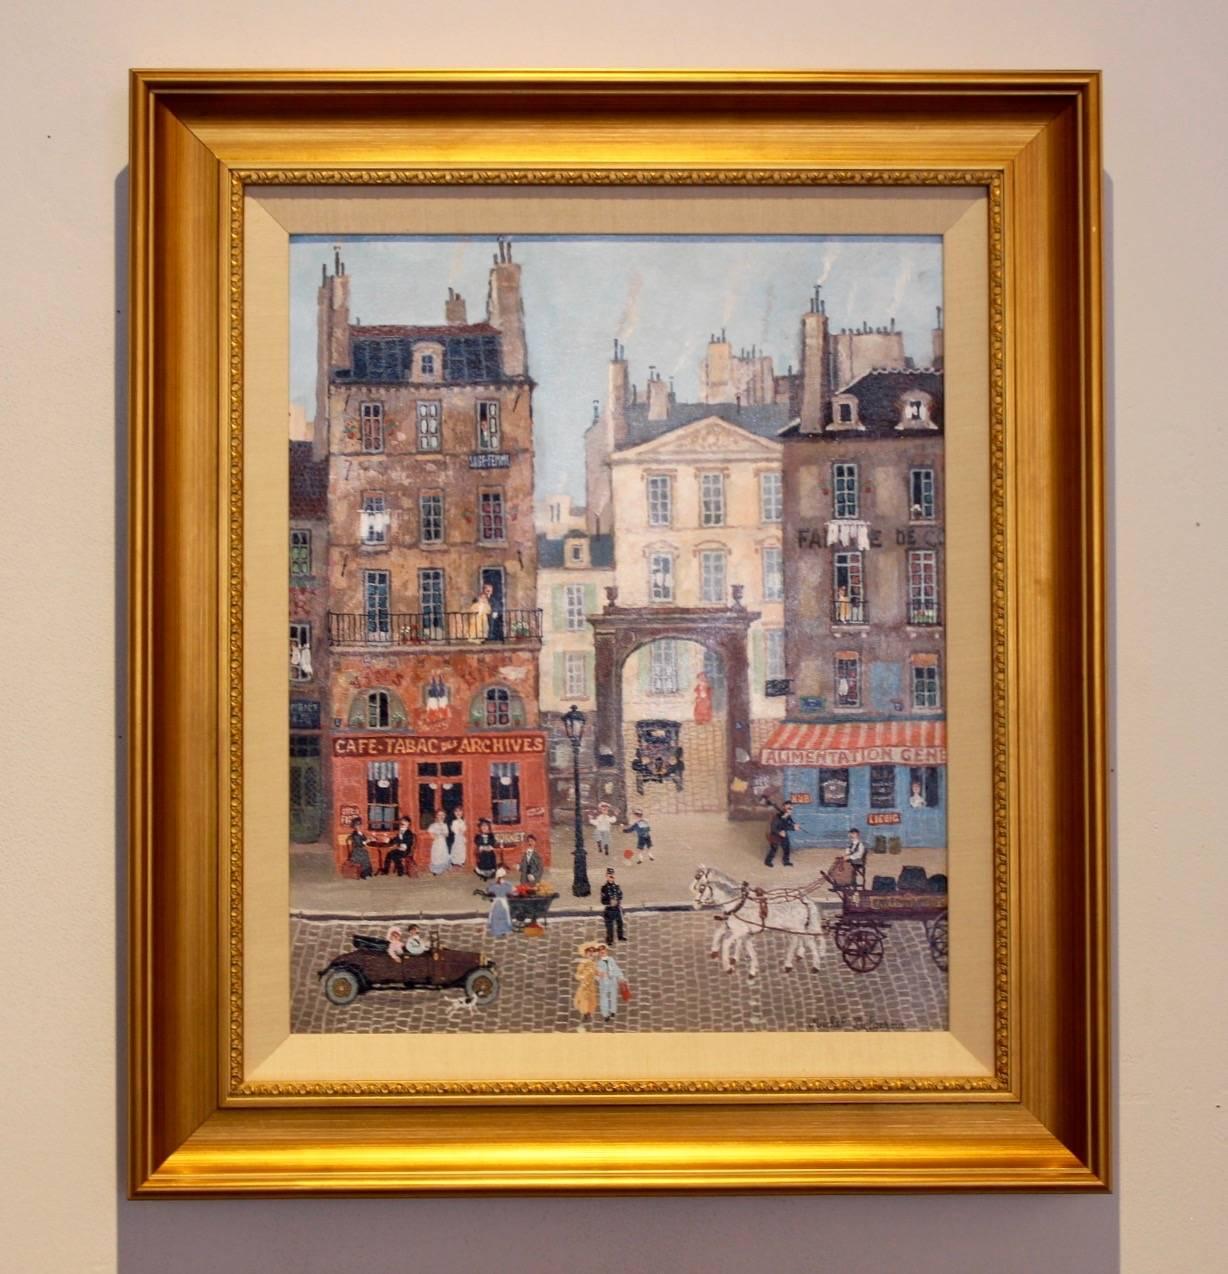 French impressionistic cityscape, takes place in Paris, figures  walking on cobblestone, street life, accents of red, urban smoke

Michel Delacroix was born in 1933 on the Left Bank, in the 14th Arrondissement of Paris. He started painting at the